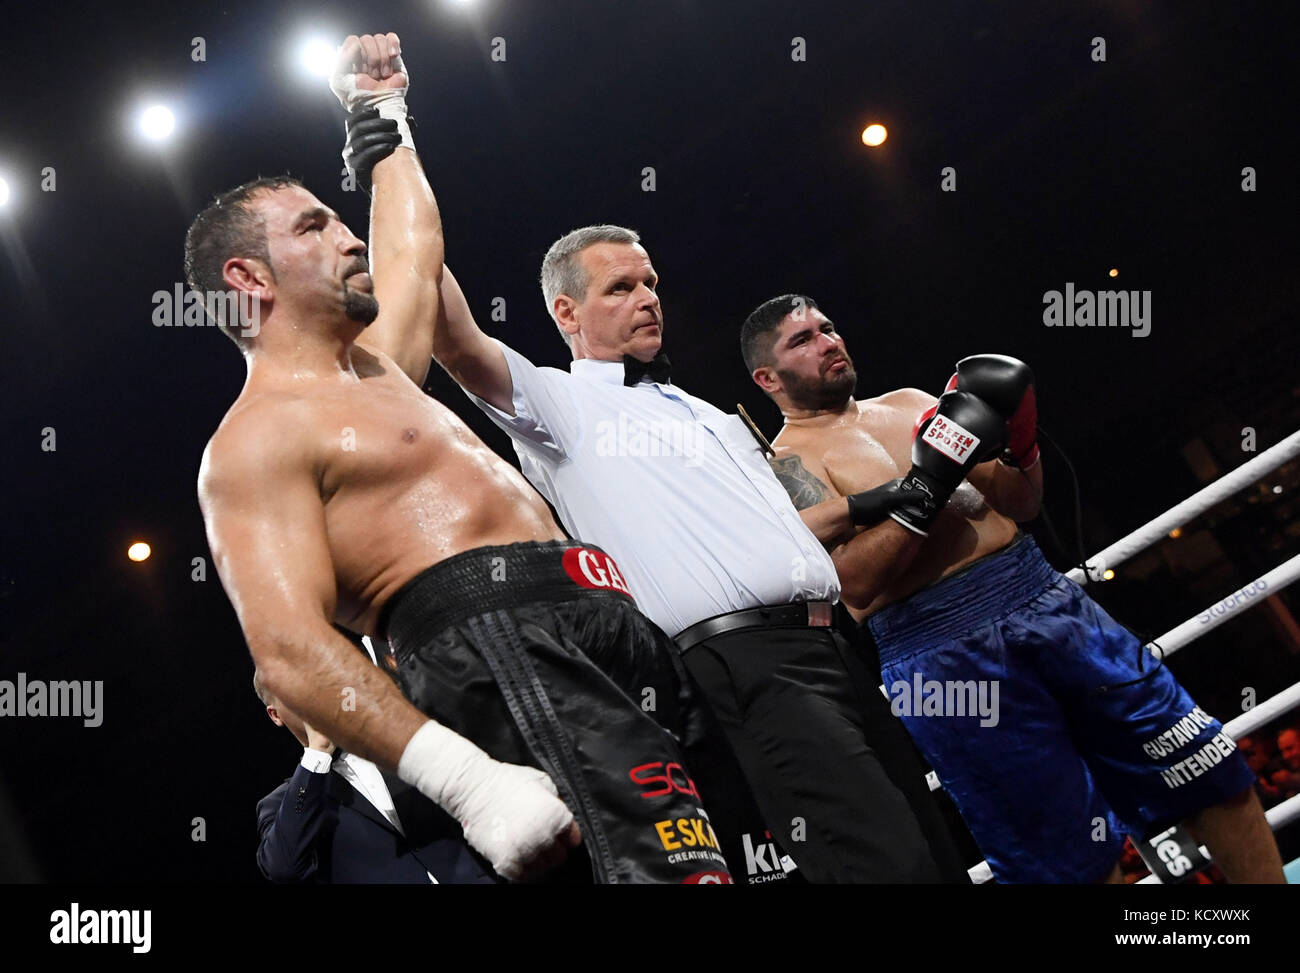 Stuttgart, Germany. 7th Oct, 2017. Firat Arslan (l) celebrates his victory in the professional boxing match between Arslan from Germany and Valori from Argentina in Stuttgart, Germany, 7 October 2017. Credit: Marijan Murat/dpa/Alamy Live News Stock Photo